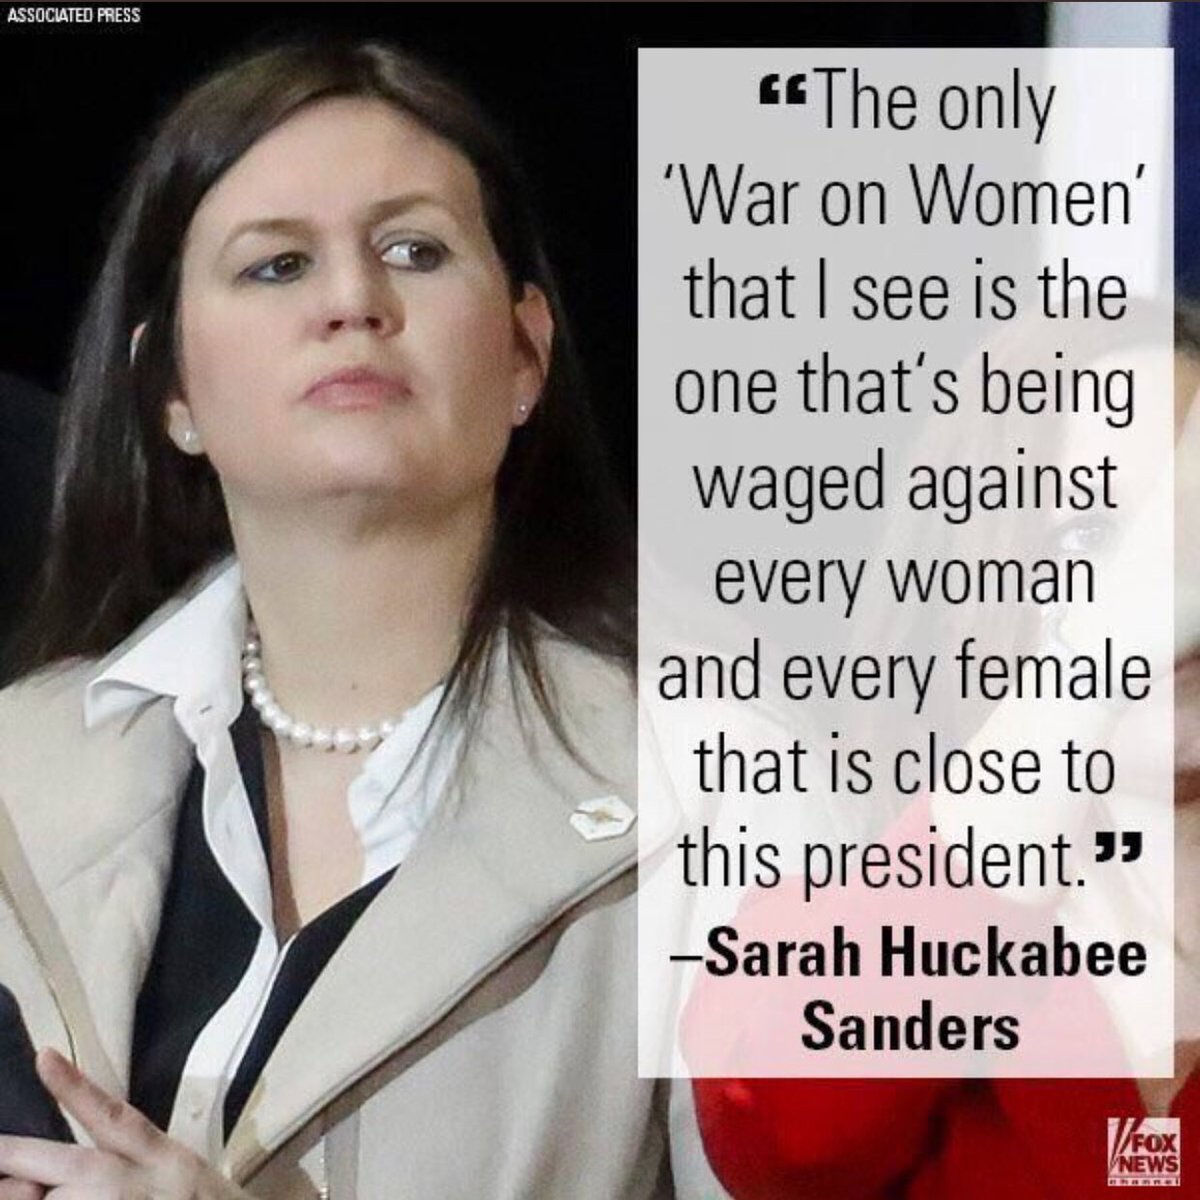 And crickets from all the #TimesUp & #WomensMovement celebrities this morning.  No defense for a fellow working mom over the reprehensible attacks levied against her last night?  Oh, I forgot.  Only liberal women are allowed to be victims, not conservative ones. 🙄 #WeGoHighMyAss